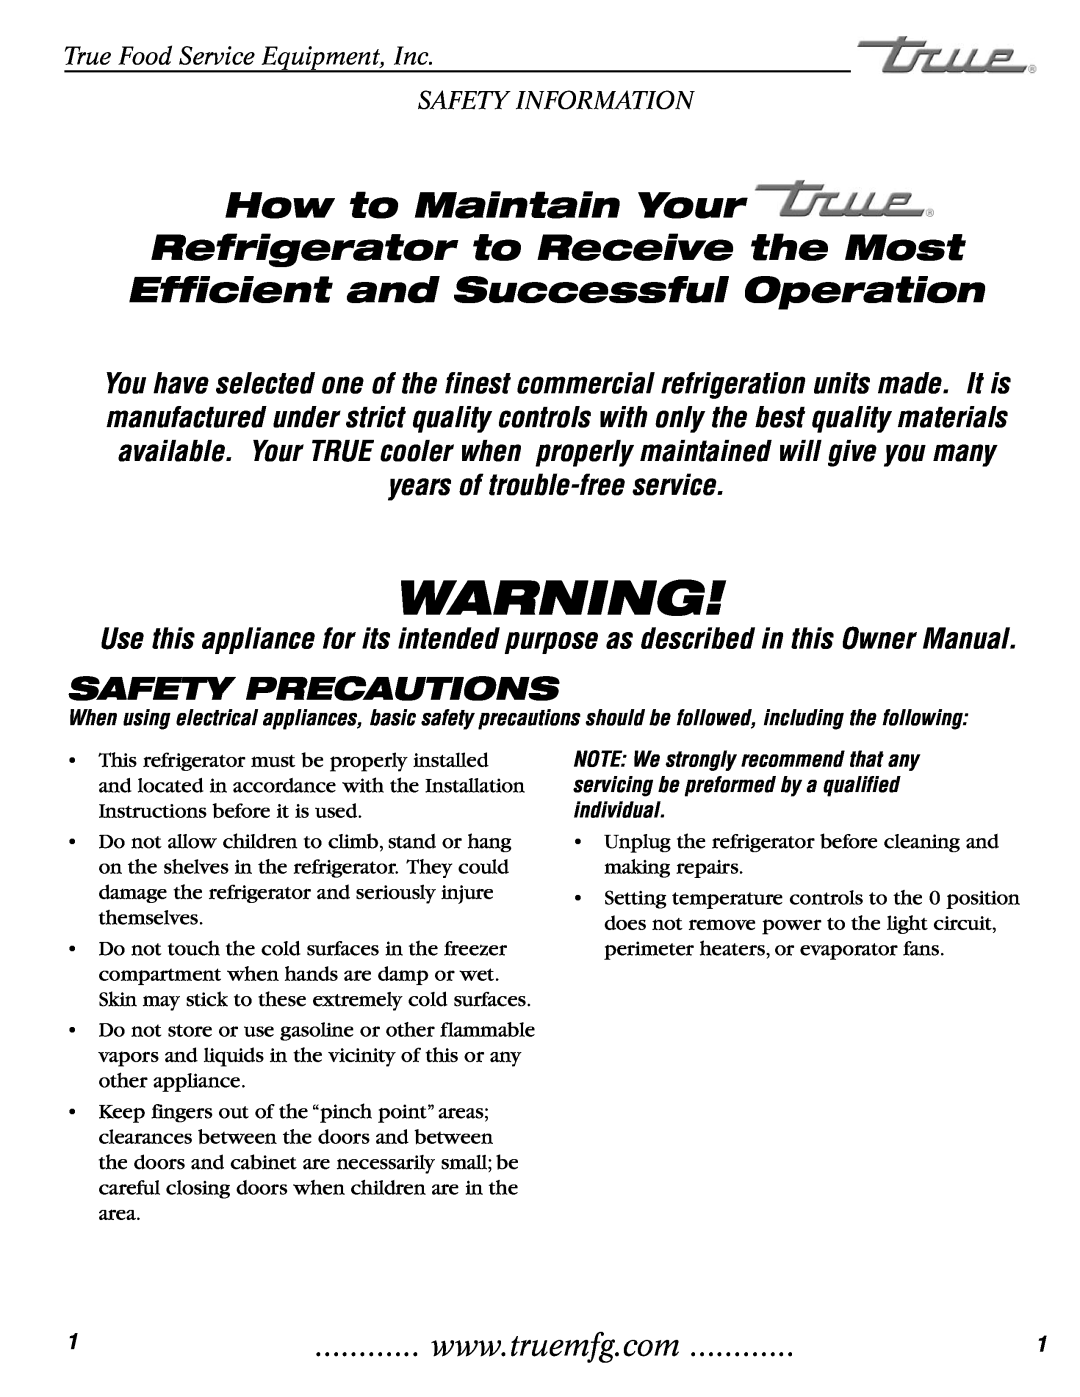 True Manufacturing Company GDM-3 Safety Precautions, True Food Service Equipment, Inc SAFETY INFORMATION 